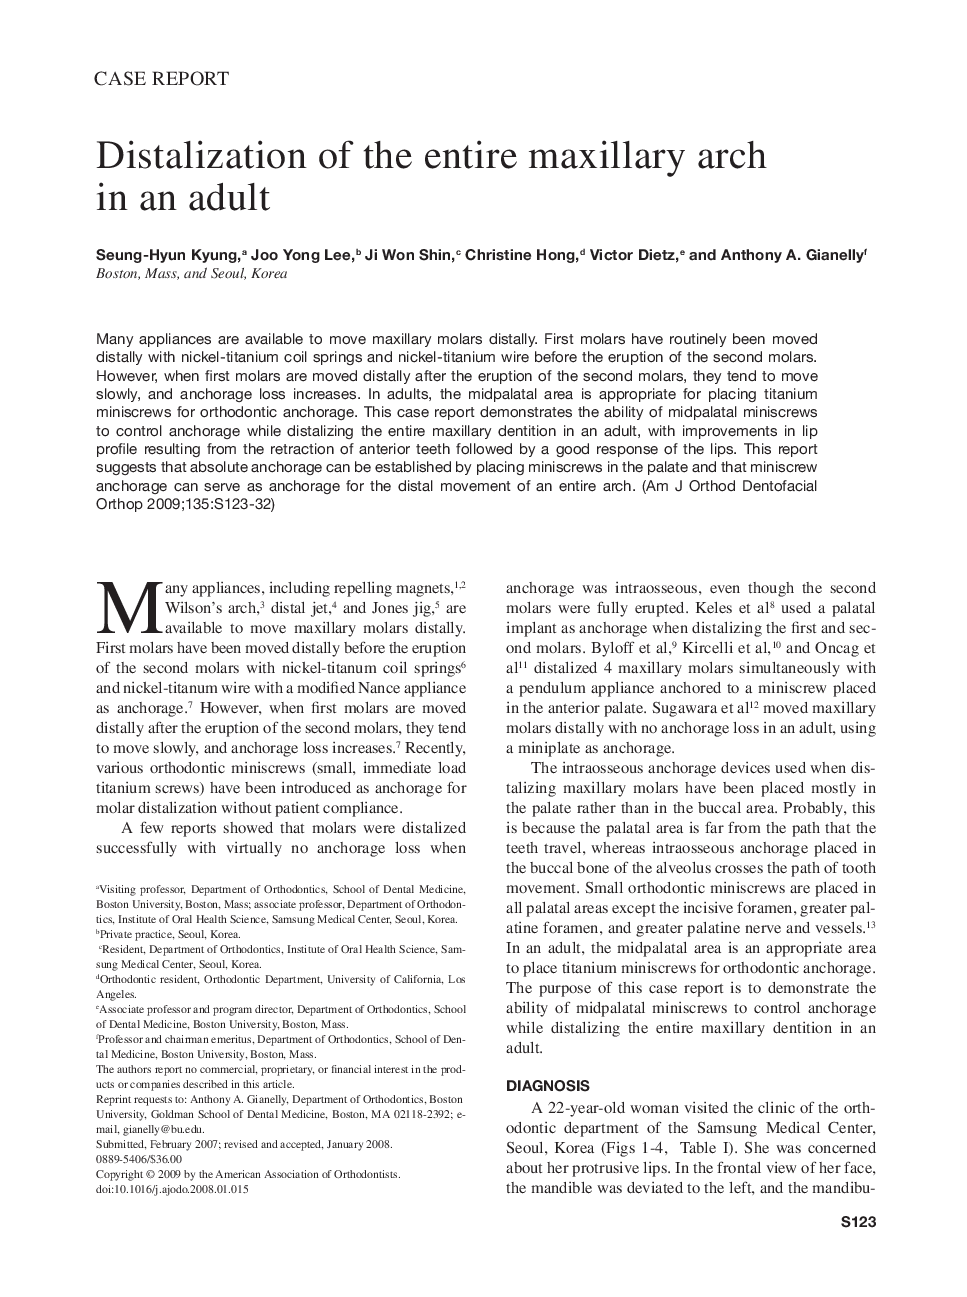 Distalization of the entire maxillary arch in an adult 